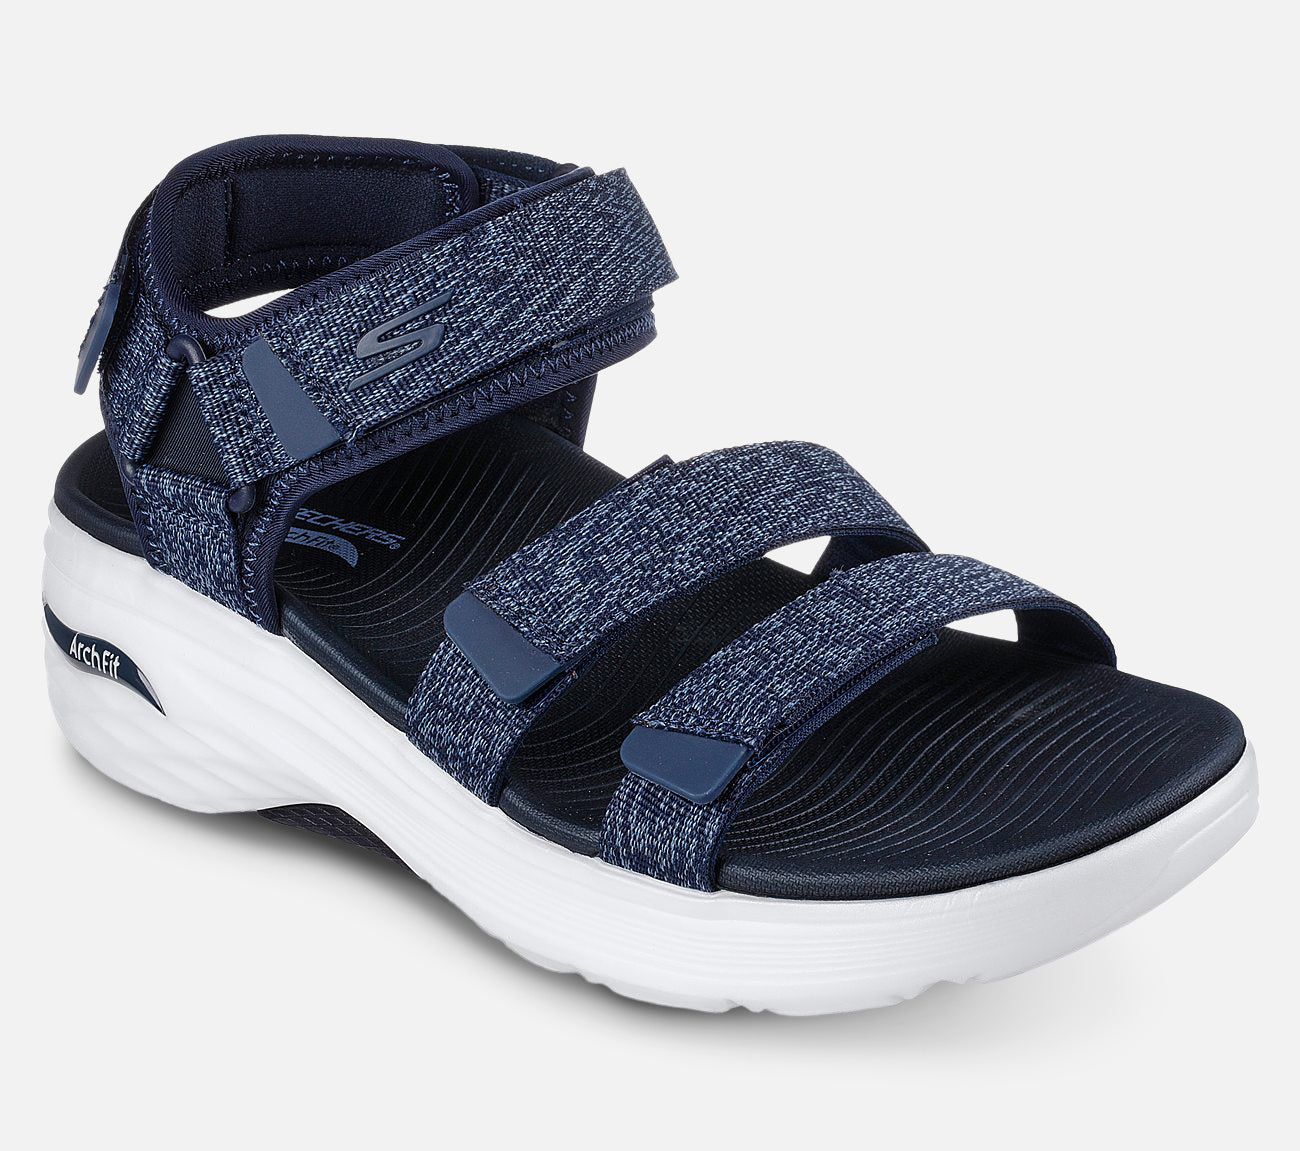 Max Cushioning Arch Fit Prime Sandal